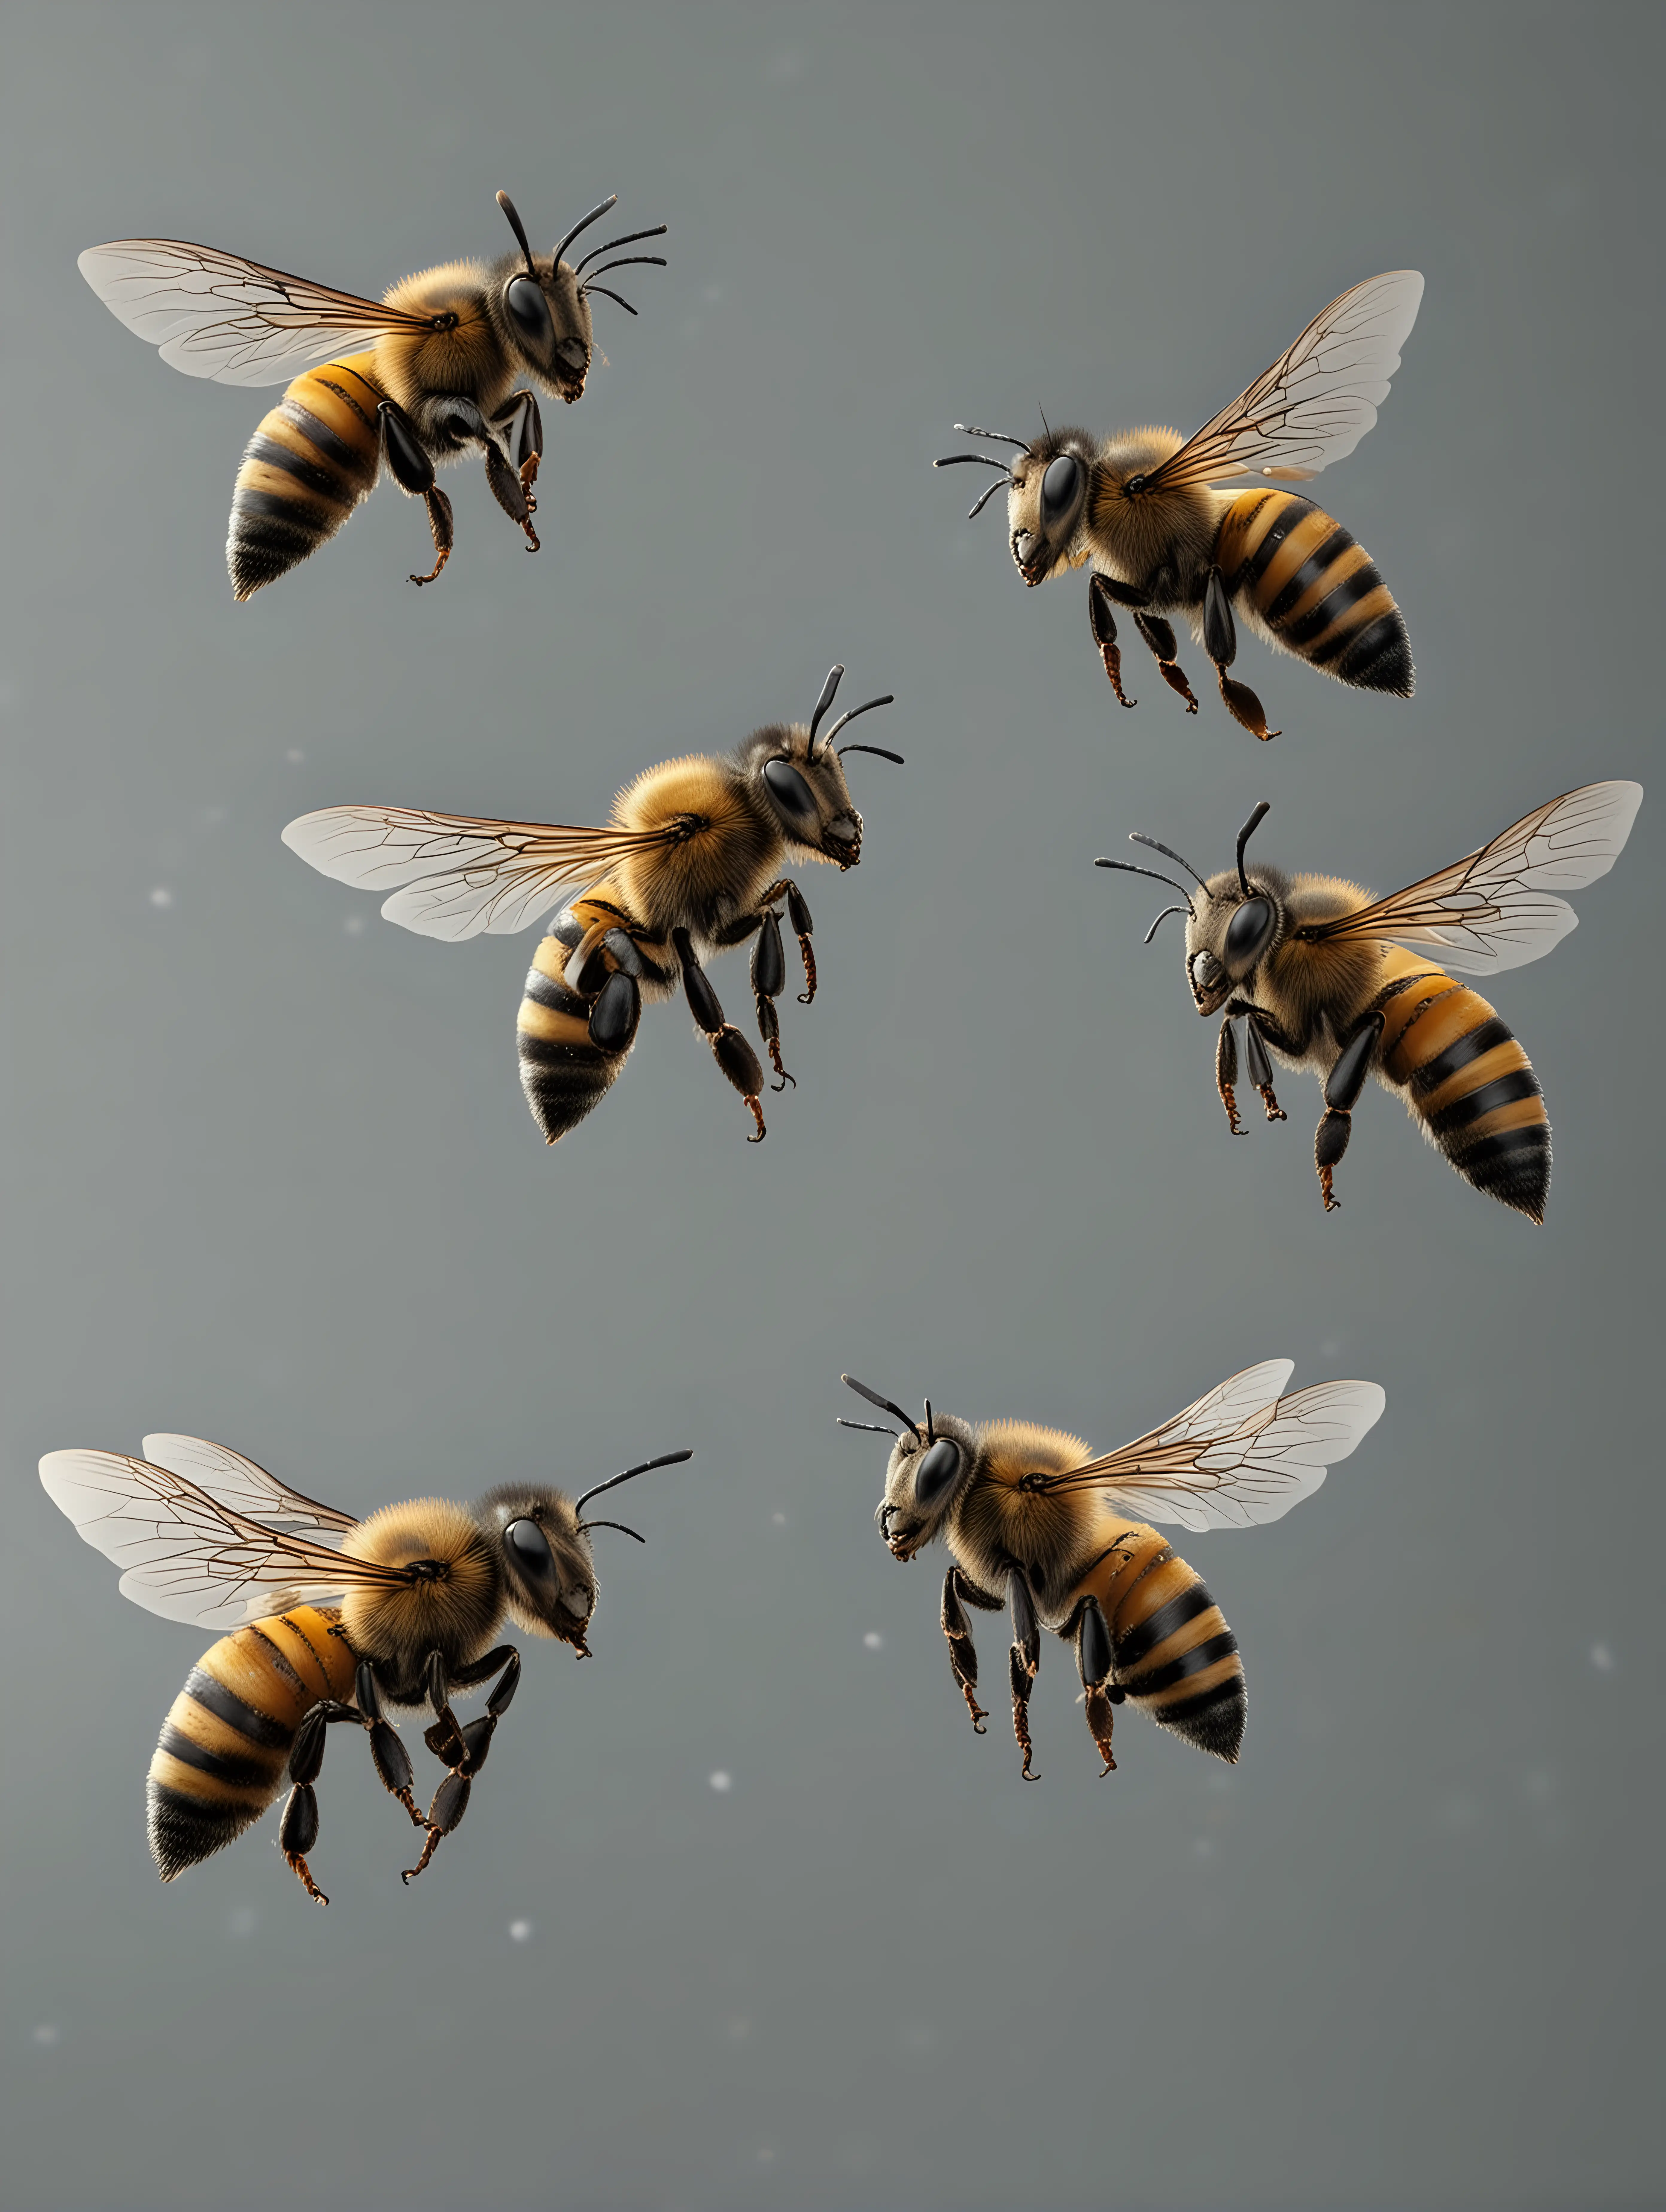 A few anatomically correct, photorealistic bees flying on a neutral gray background.

hyper-realistic
highly detailed
4k